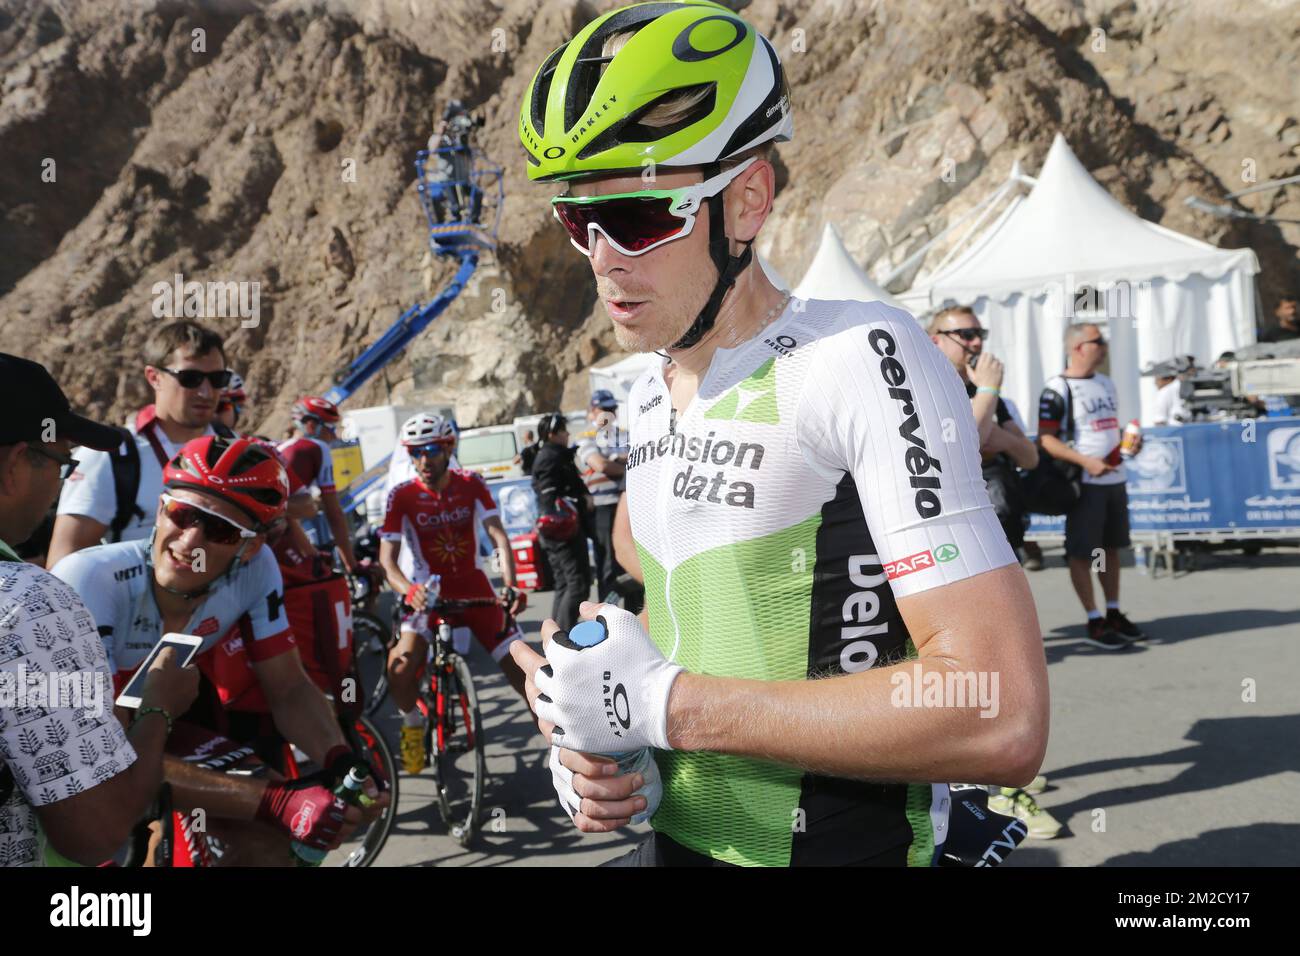 Belgian Julien Vermote of Team Dimension Data pictured after stage 4 of the Dubai Tour 2018 cycling race, 172km from Dubai to Hatta Dam, United Arab Emirates, Friday 09 February 2018. The Dubai Tour 2018 is taking place from 6 to 10 February. BELGA PHOTO YUZURU SUNADA Stock Photo